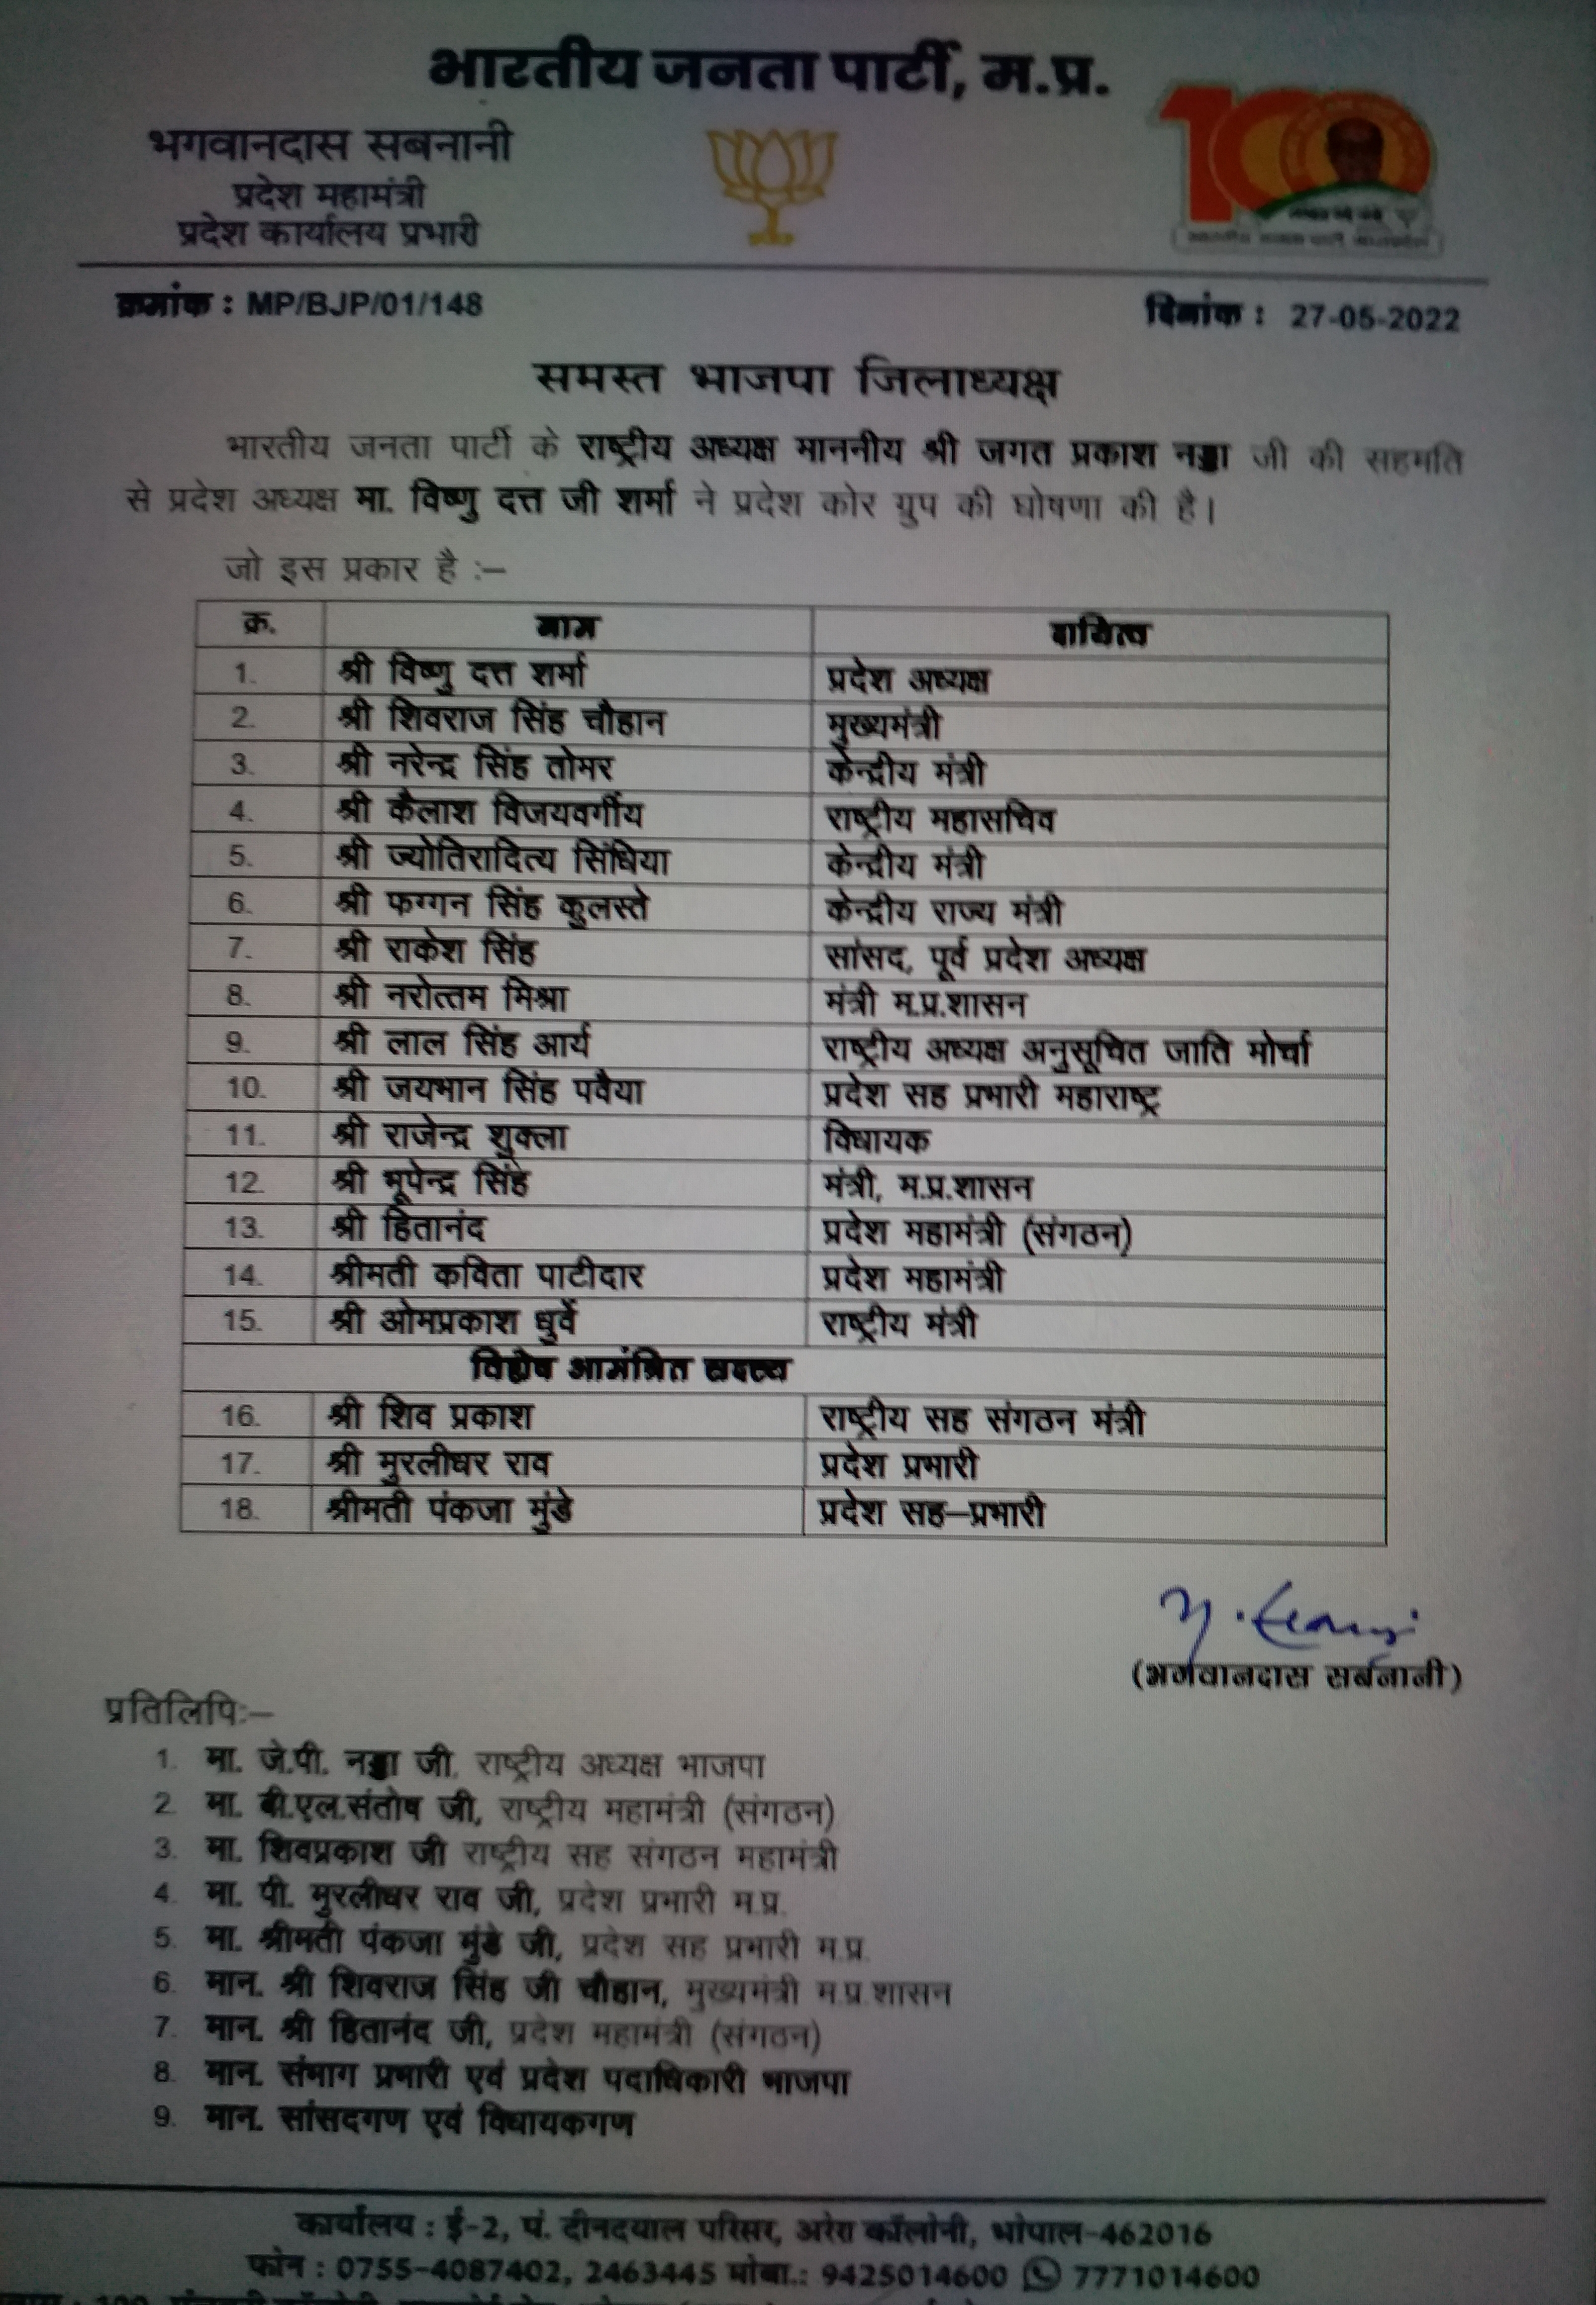 Jyotiraditya Scindia included in core group and election committee